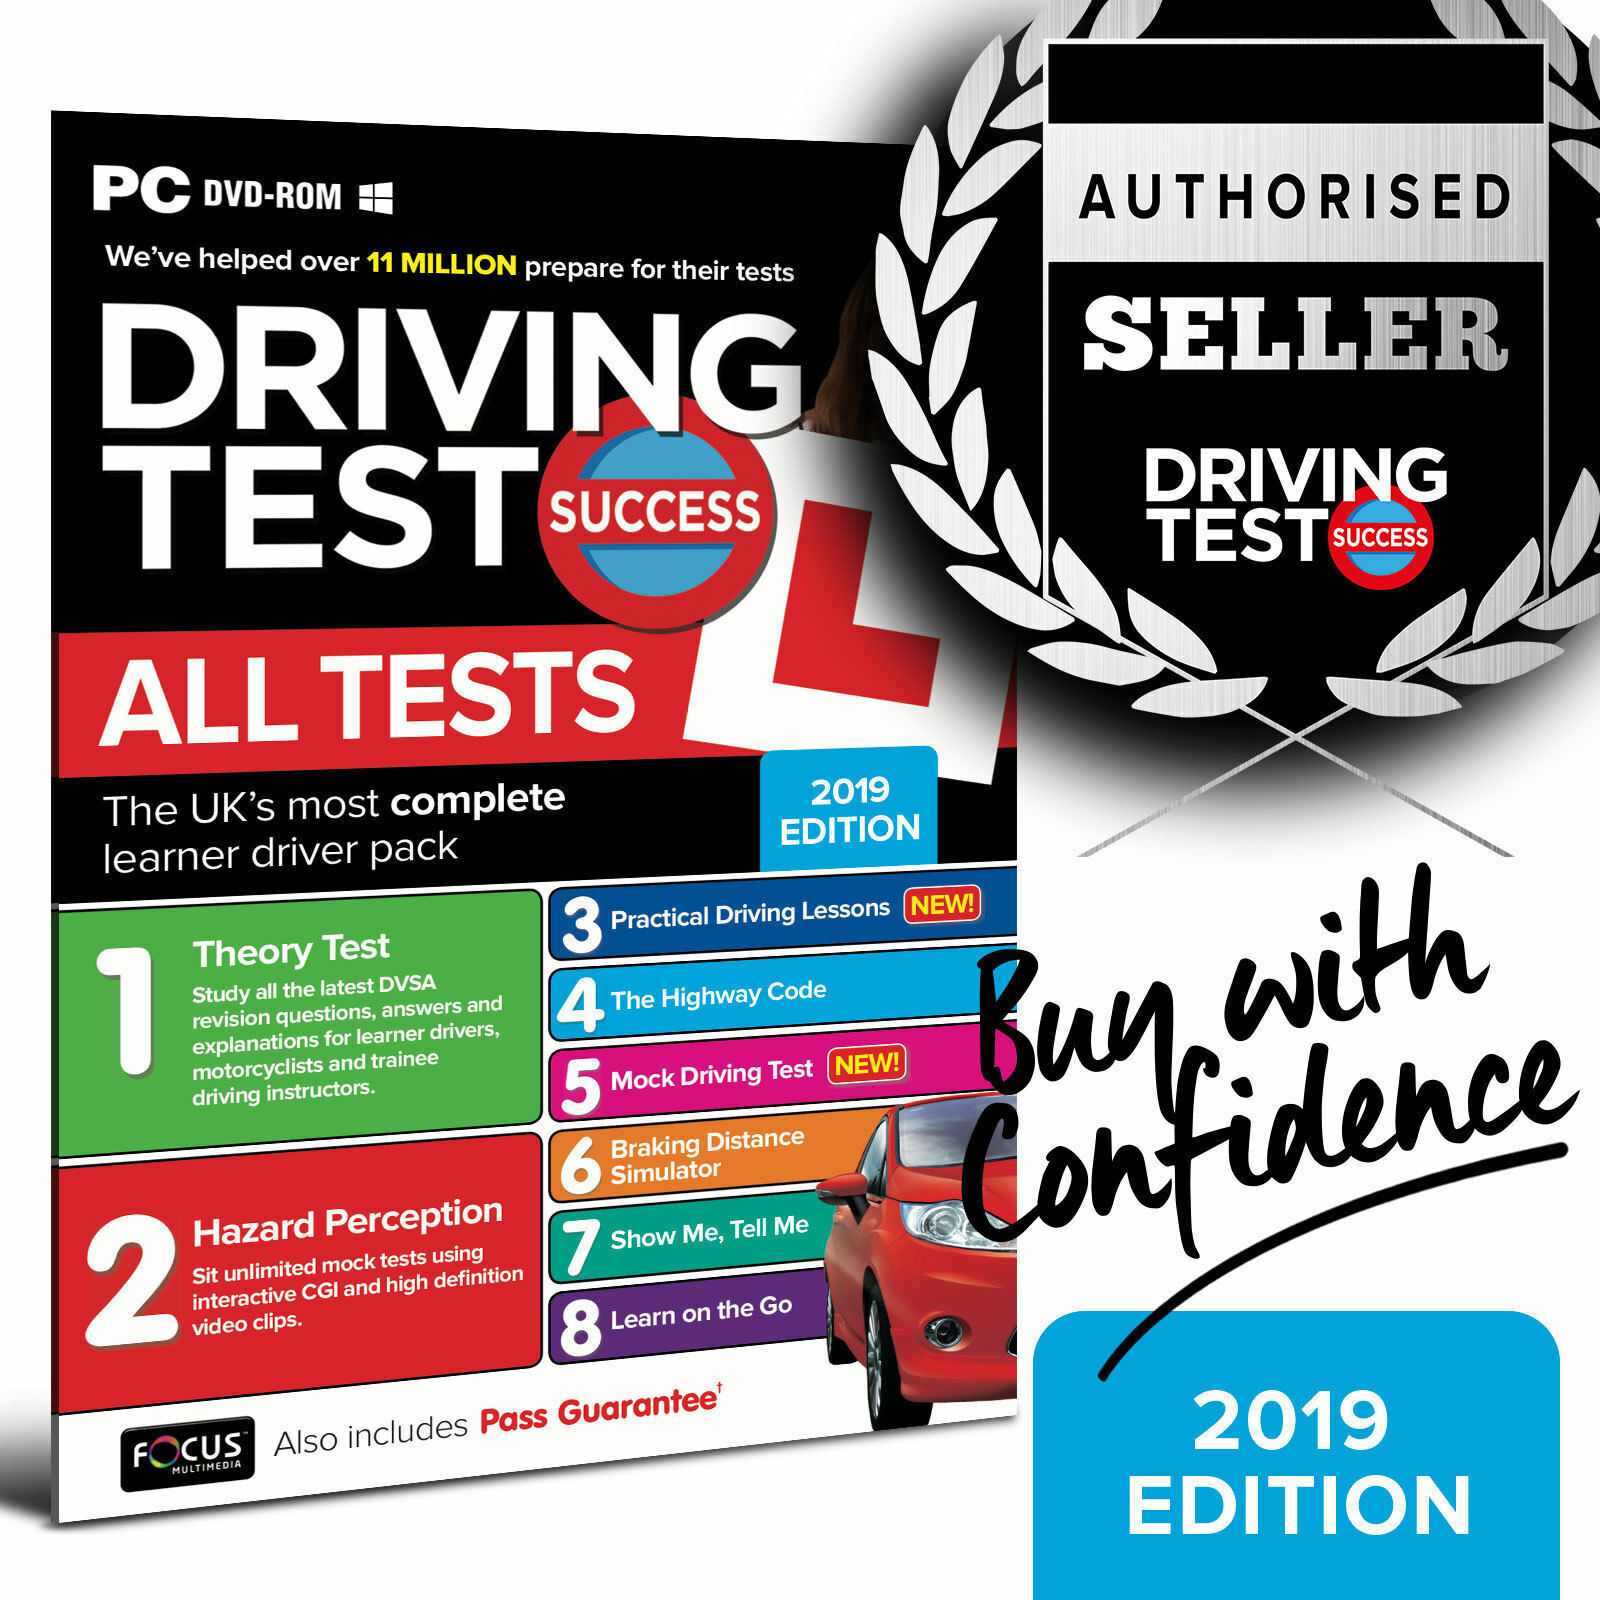 Driving Theory Tests & Hazard Perception 2019 PC DVD Rom LATEST 2019 EDITION